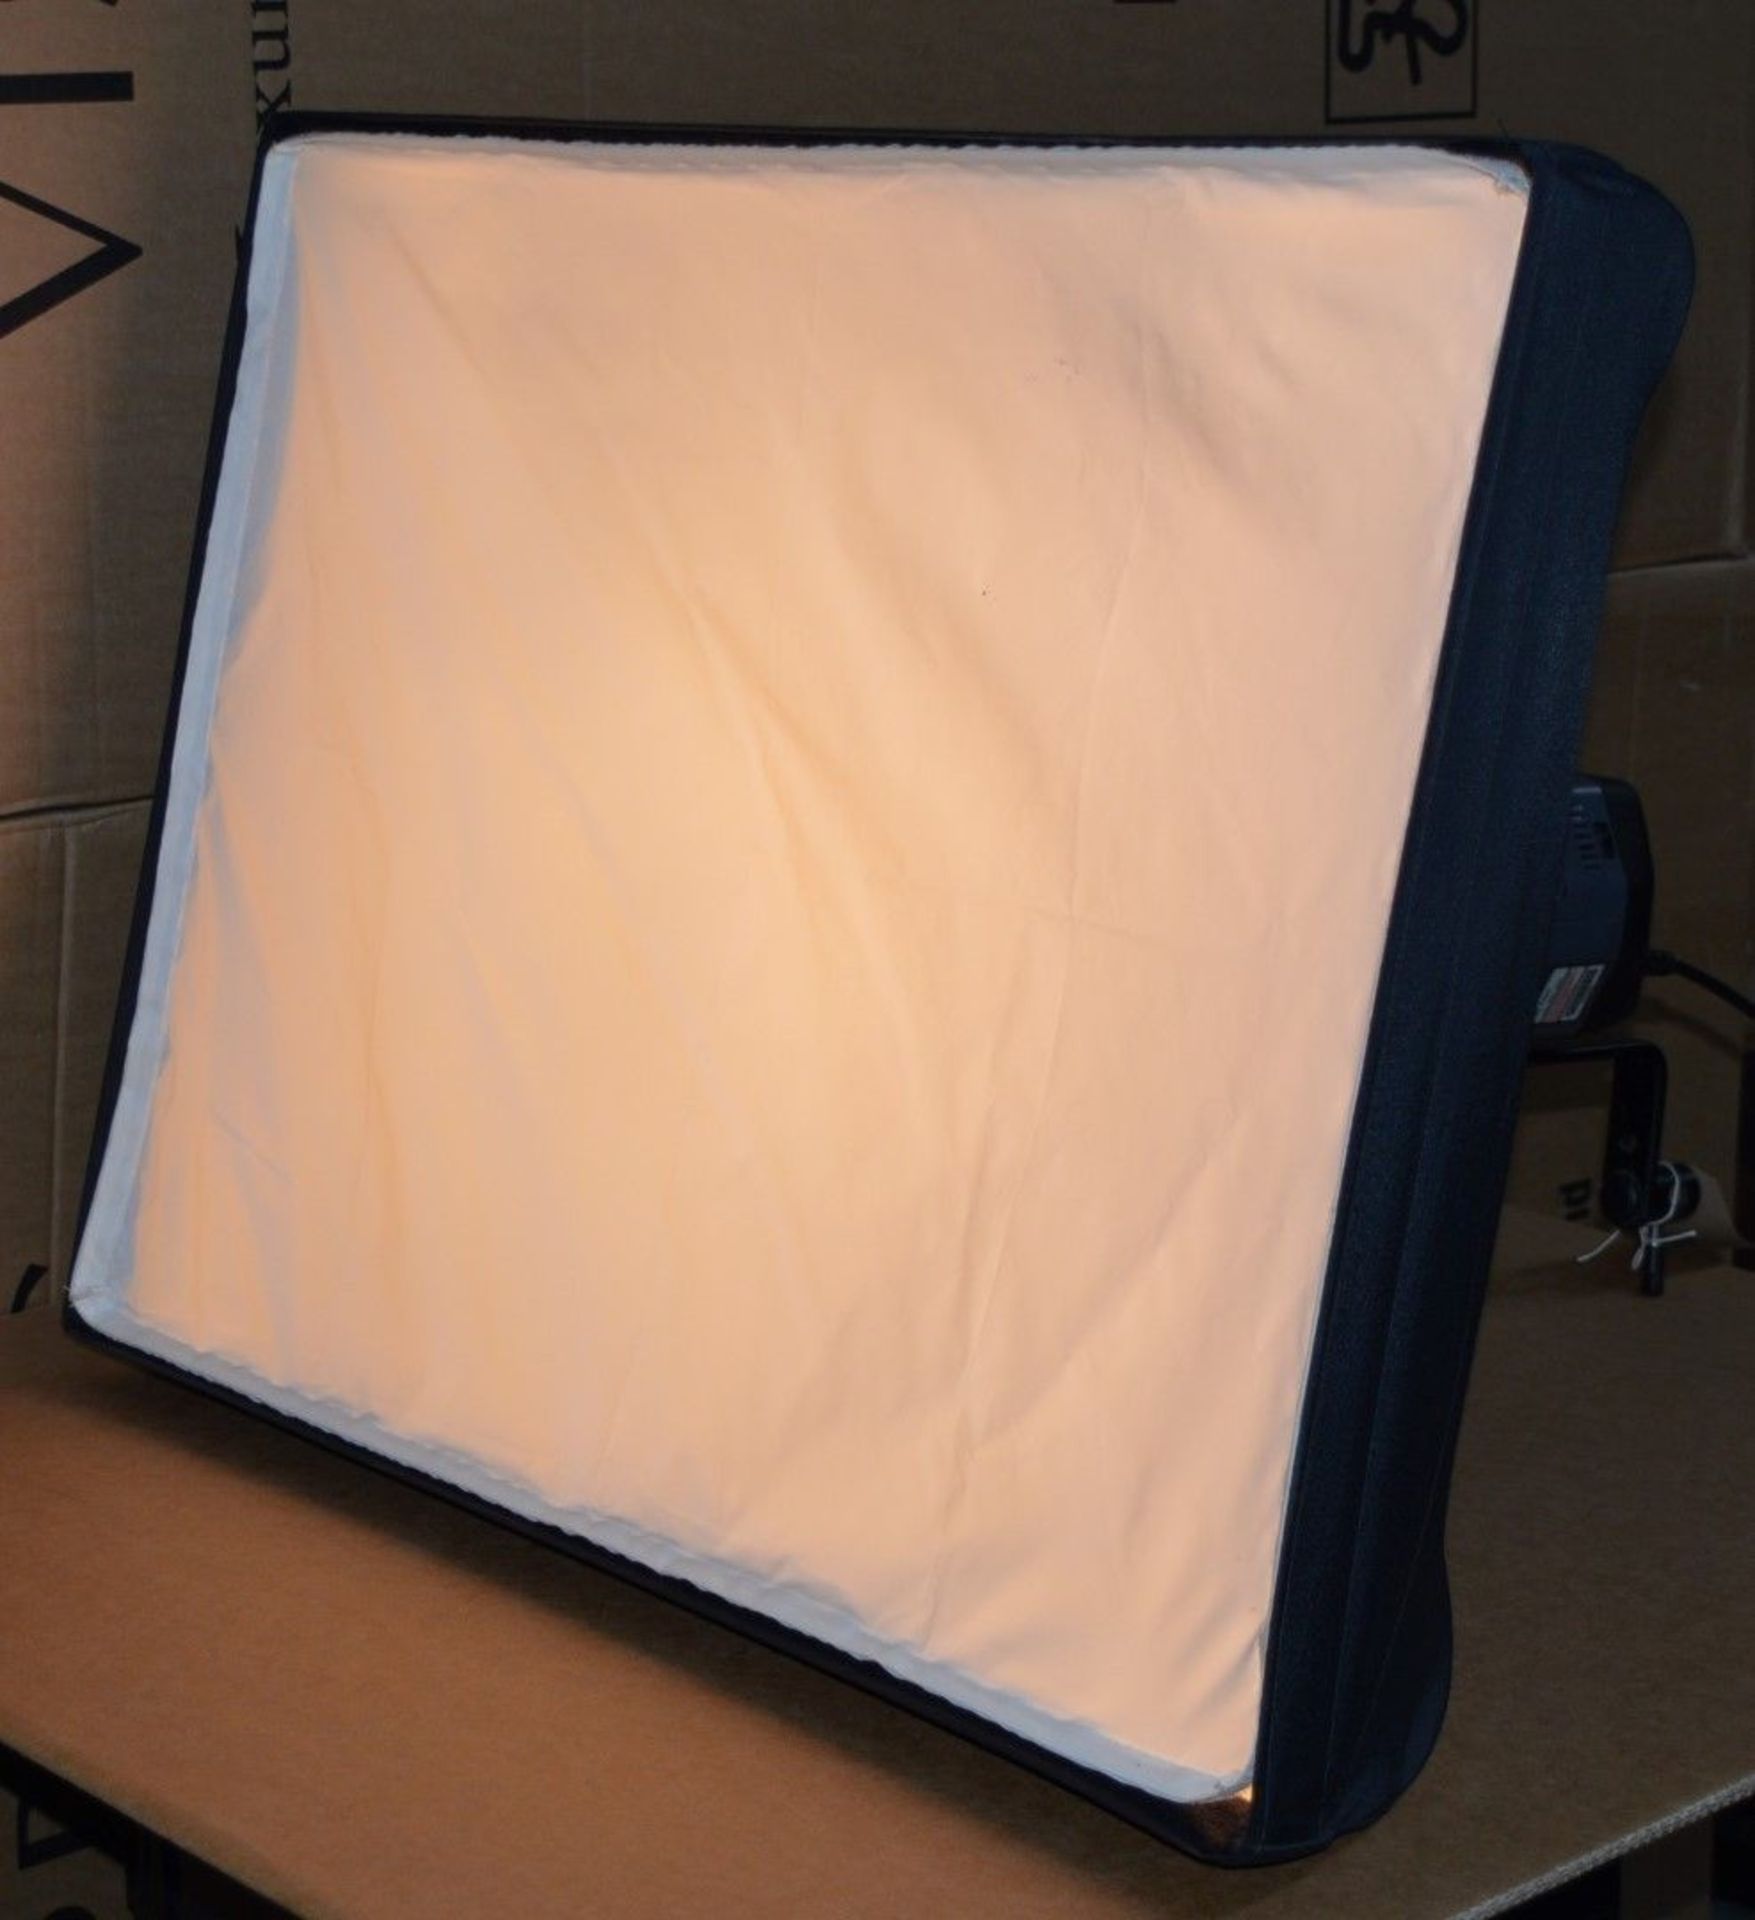 1 x Bowens Flash Light Wafer Softbox - Professional Photography Equipment - Good Condition -